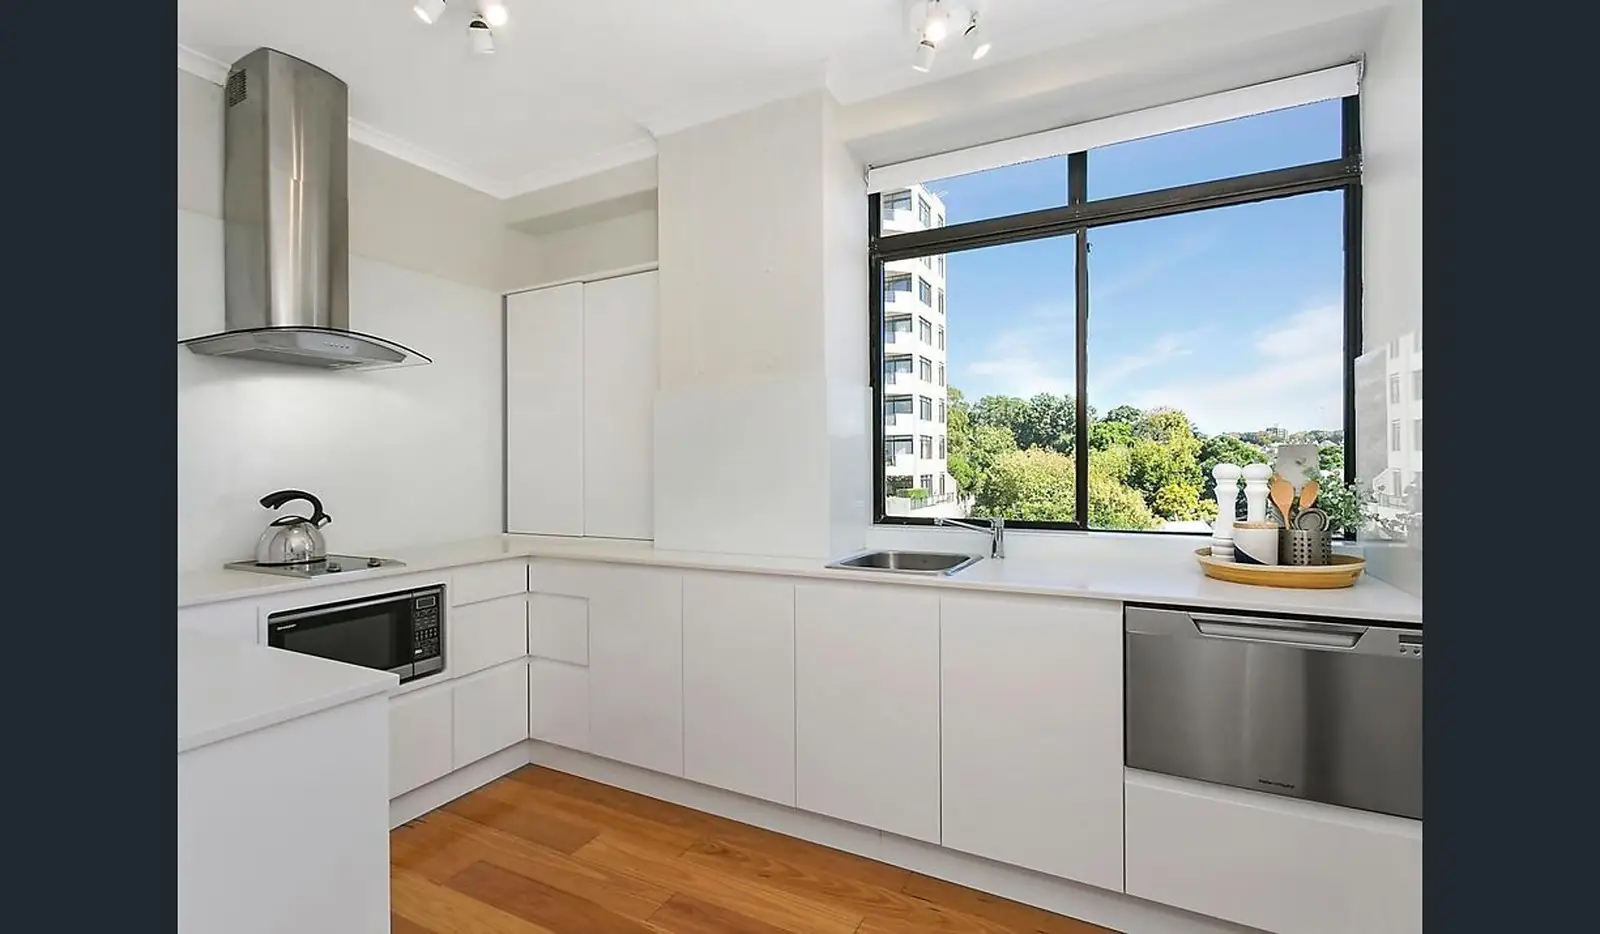 Photo #3: 809/180 Ocean Street, Edgecliff - Sold by Sydney Sotheby's International Realty